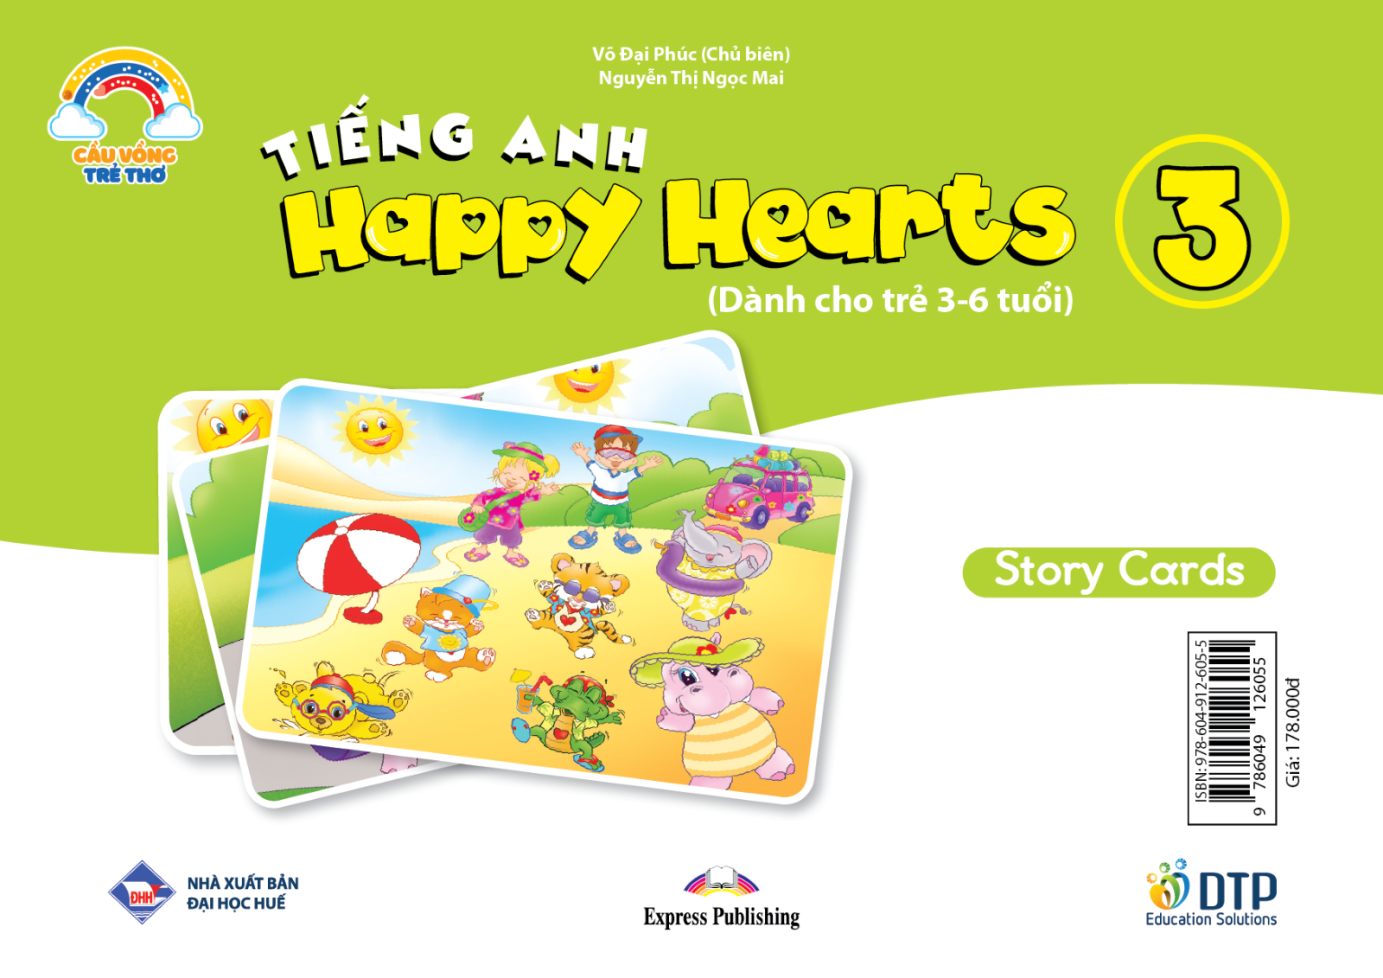 Tiếng Anh Happy Hearts 3 - Story Cards